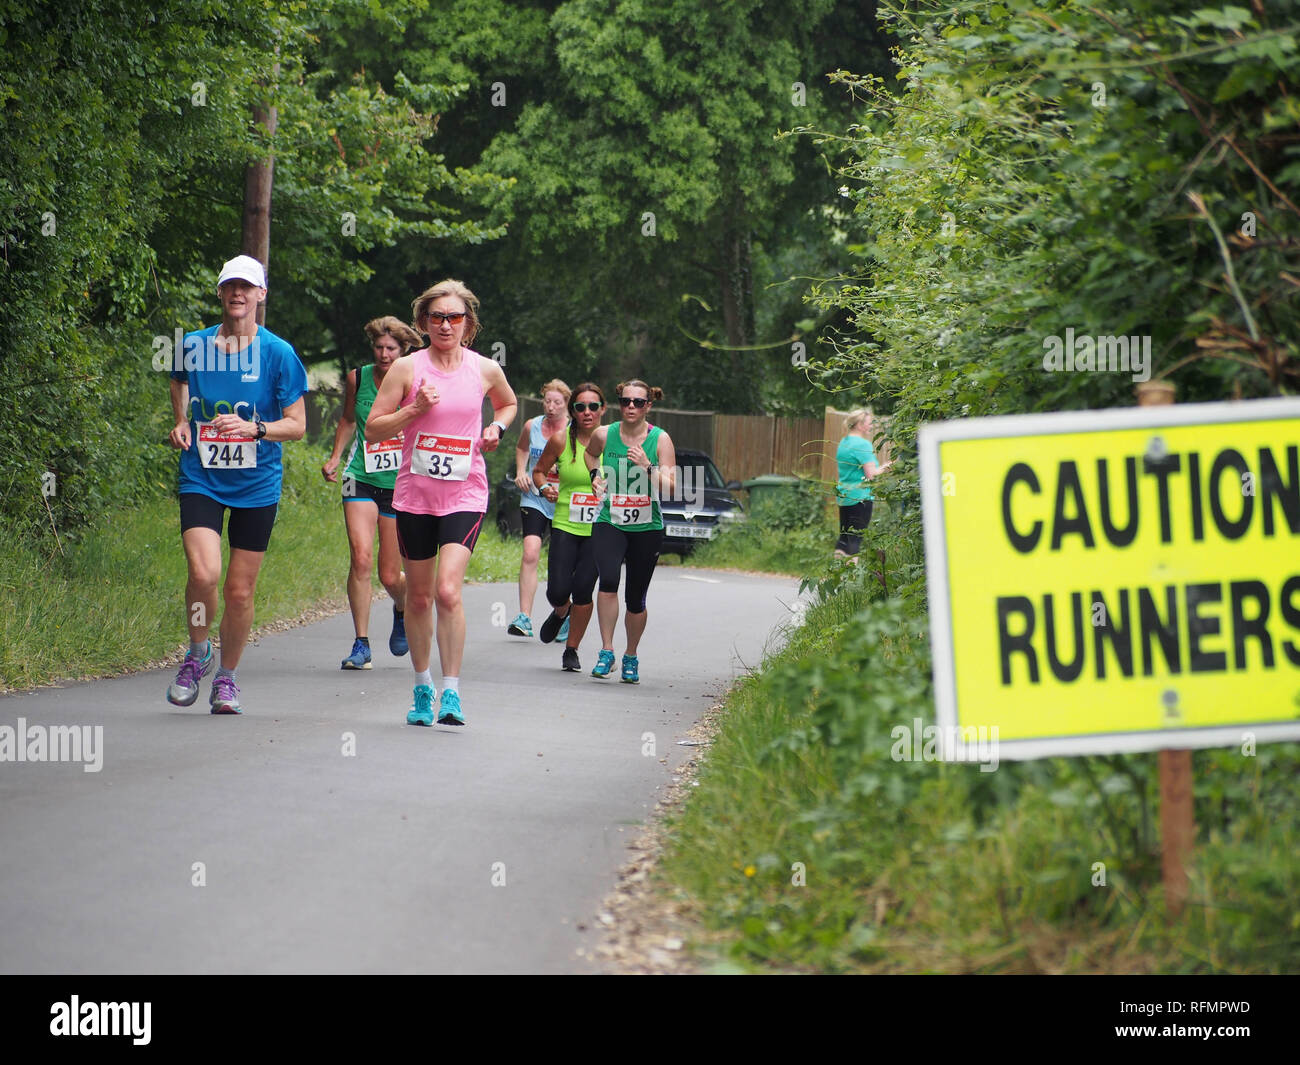 Female runners taking part in a ladies road running race with a 'caution runners' sign on the road Stock Photo